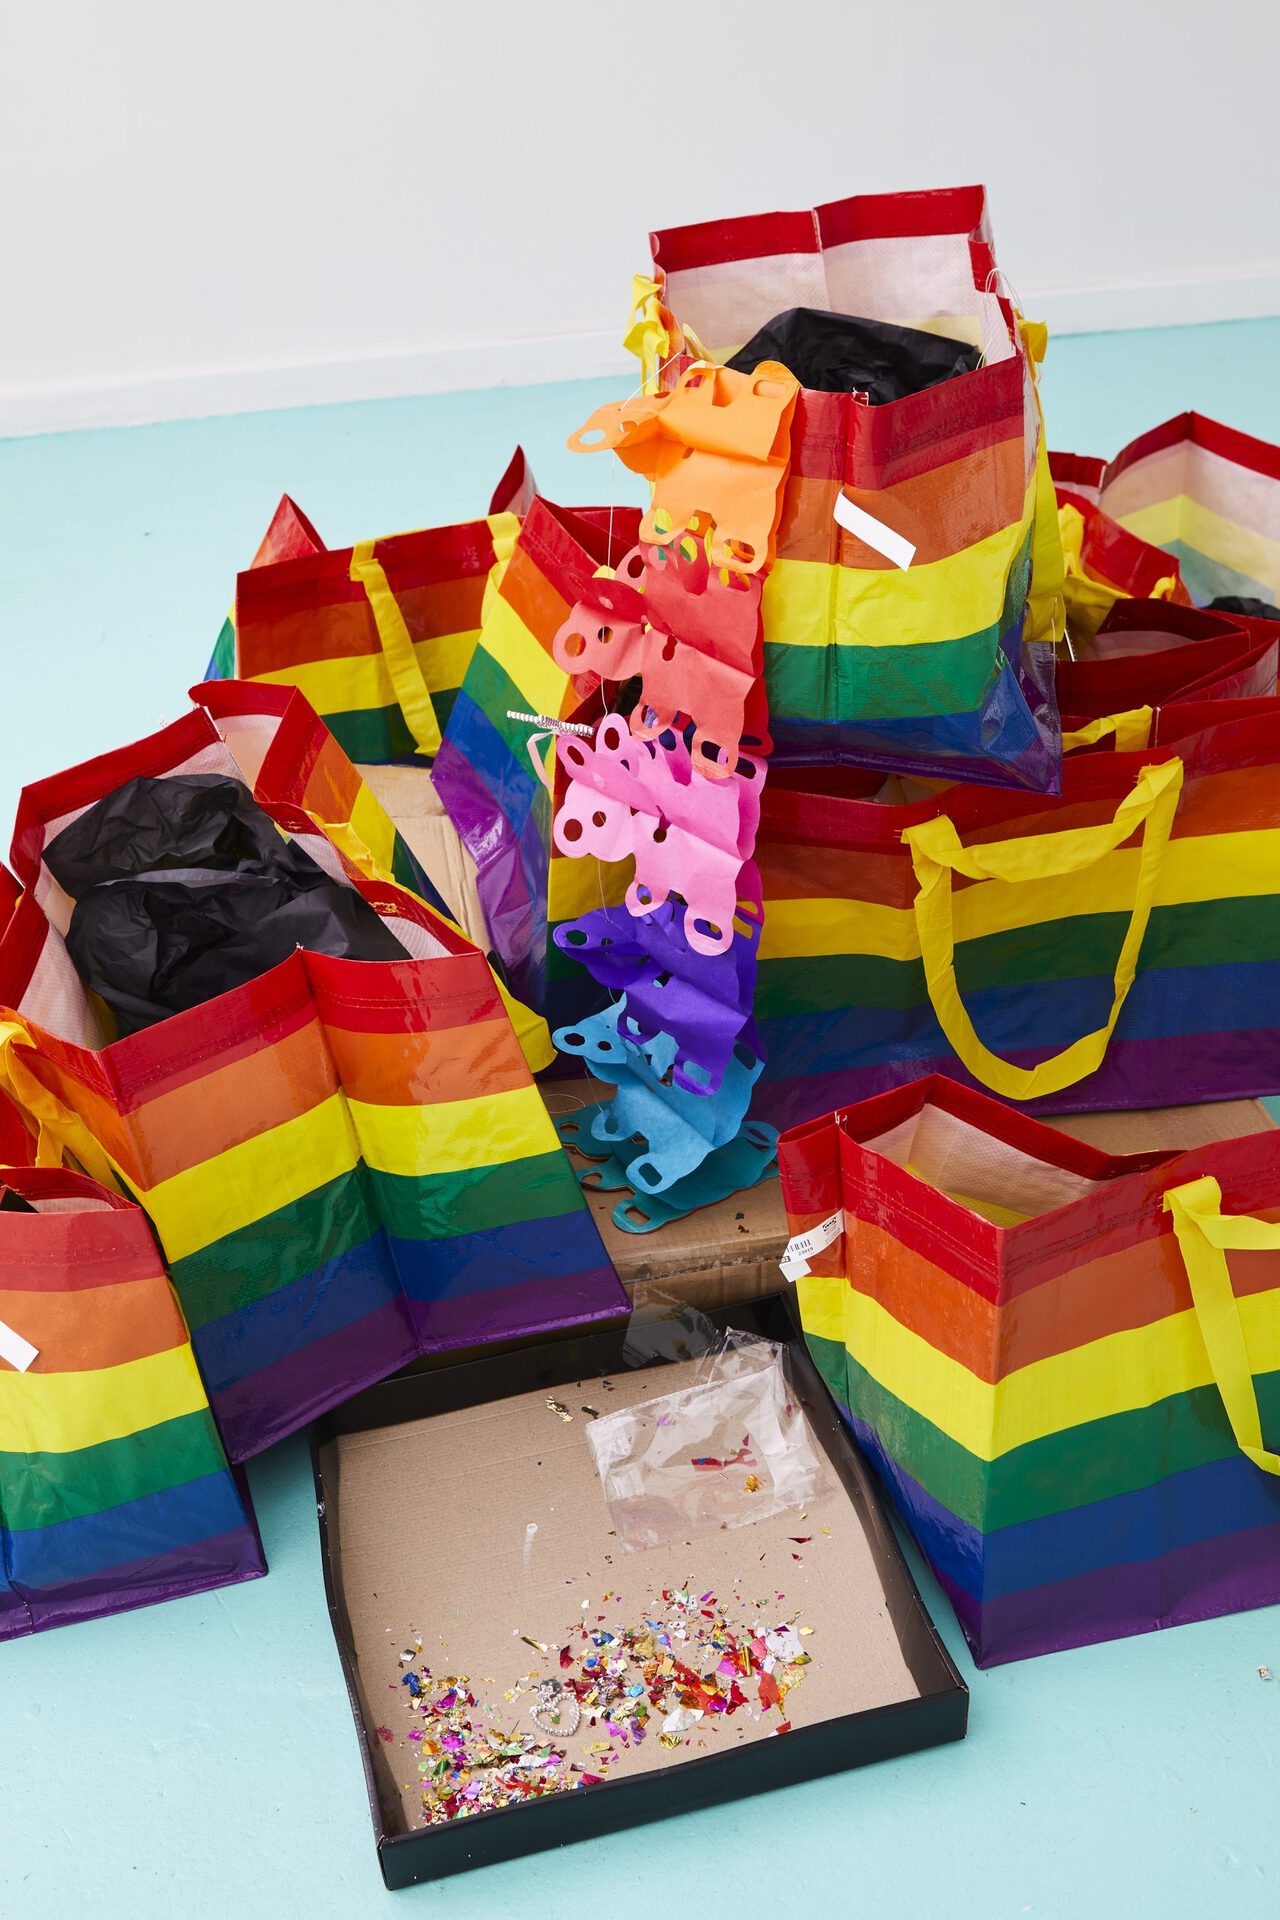 Spencer Lai Untitled, 2020 IKEA 'Storstomma' pride bags, cardboard, tissue paper, party supplies and decorations, fabricated weaponry, tools, antique puppets